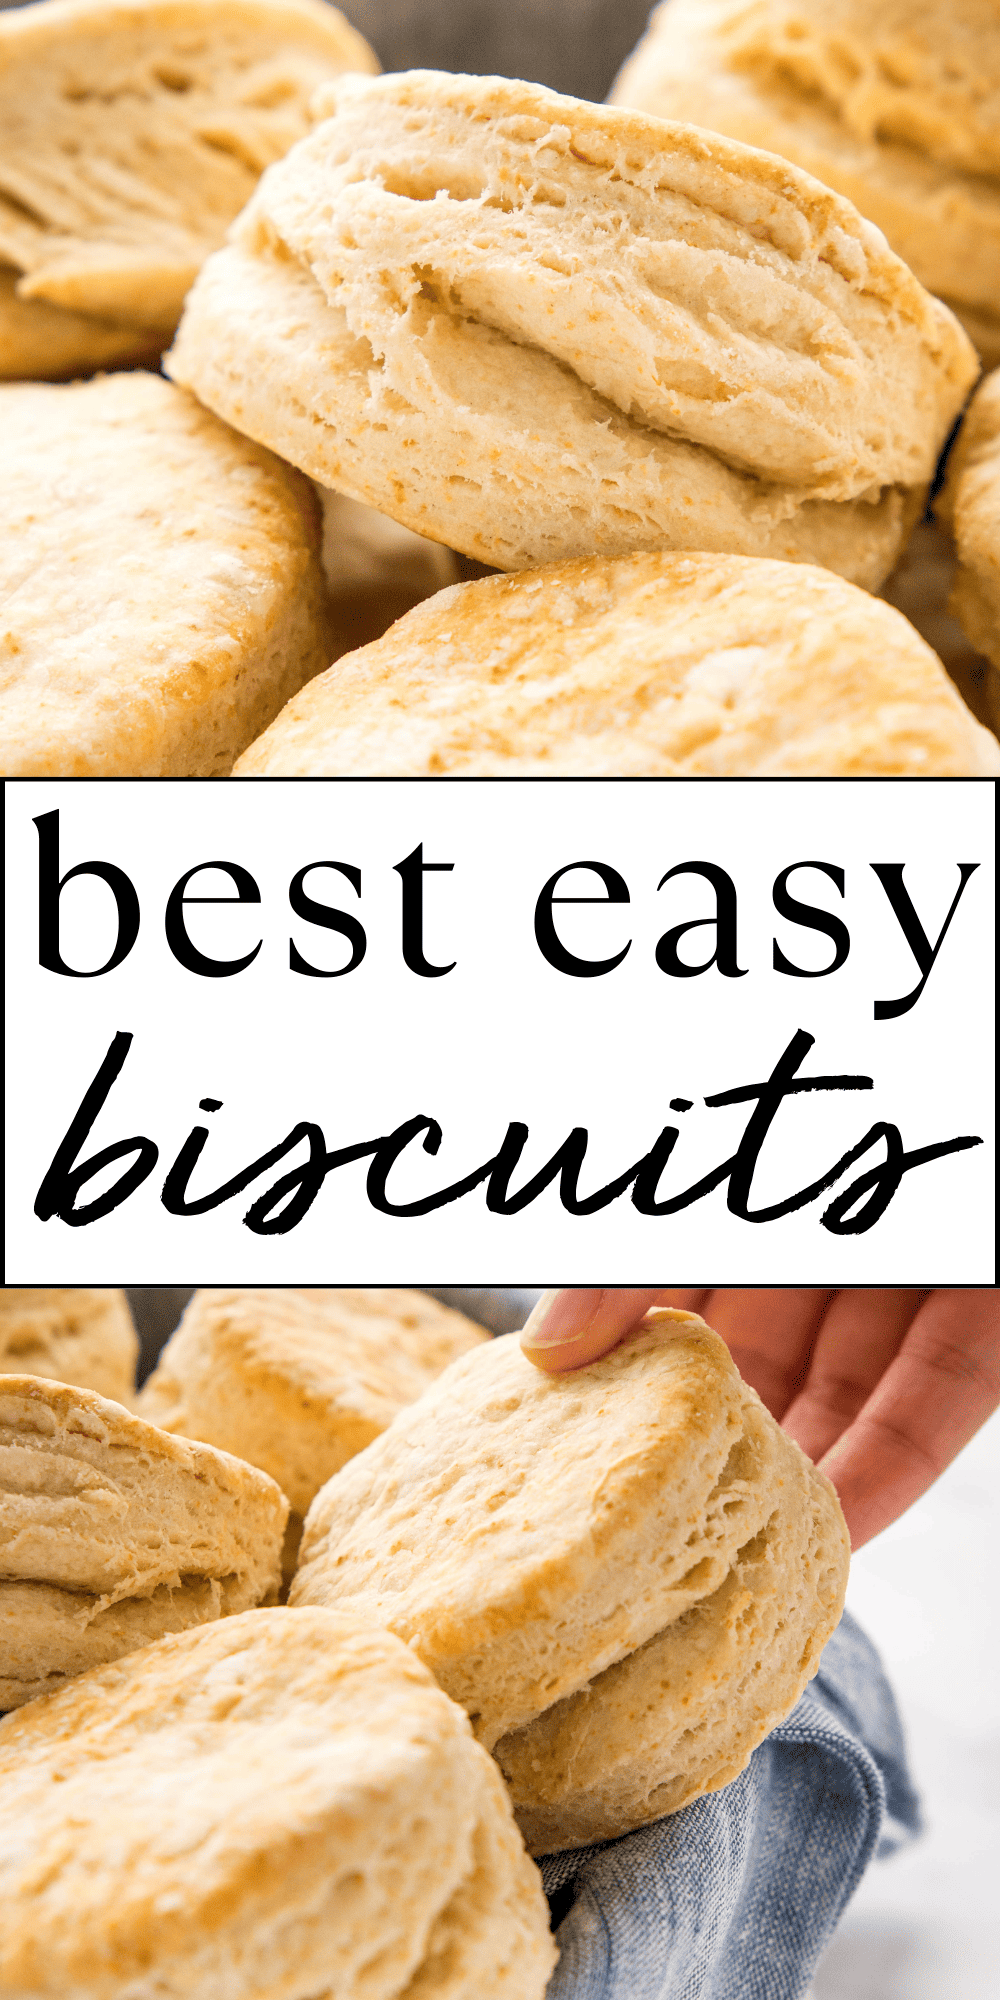 This Biscuits recipe is the ultimate guide to making the perfect flaky, fluffy biscuits from scratch. Make them with basic ingredients using our PRO tips for the BEST buttermilk biscuits you've ever baked! Recipe from thebusybaker.ca! #biscuits #biscuitsrecipe #buttermilkbiscuits #easybiscuits #Homemadebiscuits #biscuitrecipe #biscuitsrecipe #biscuitsandgravy #breakfast #buns #rolls #pastry #baking via @busybakerblog